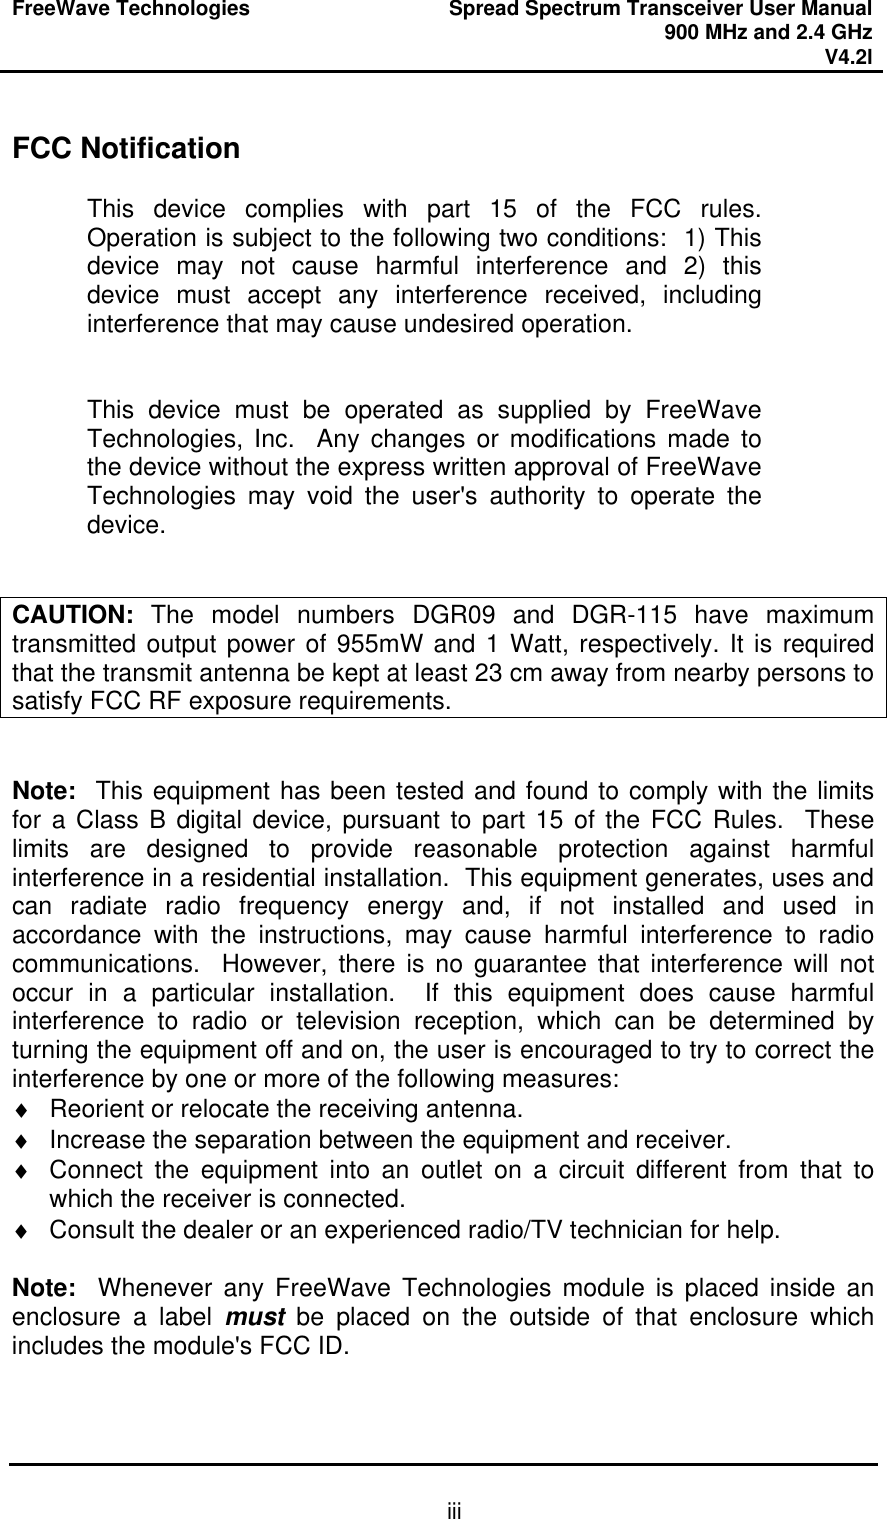 FreeWave Technologies Spread Spectrum Transceiver User Manual 900 MHz and 2.4 GHz V4.2l   iii FCC Notification  This device complies with part 15 of the FCC rules.  Operation is subject to the following two conditions:  1) This device may not cause harmful interference and 2) this device must accept any interference received, including interference that may cause undesired operation.   This device must be operated as supplied by FreeWave Technologies, Inc.  Any changes or modifications made to the device without the express written approval of FreeWave Technologies may void the user&apos;s authority to operate the device.   CAUTION: The model numbers DGR09 and DGR-115 have maximum transmitted output power of 955mW and 1 Watt, respectively. It is required that the transmit antenna be kept at least 23 cm away from nearby persons to satisfy FCC RF exposure requirements.   Note:  This equipment has been tested and found to comply with the limits for a Class B digital device, pursuant to part 15 of the FCC Rules.  These limits are designed to provide reasonable protection against harmful interference in a residential installation.  This equipment generates, uses and can radiate radio frequency energy and, if not installed and used in accordance with the instructions, may cause harmful interference to radio communications.  However, there is no guarantee that interference will not occur in a particular installation.  If this equipment does cause harmful interference to radio or television reception, which can be determined by turning the equipment off and on, the user is encouraged to try to correct the interference by one or more of the following measures: ♦ Reorient or relocate the receiving antenna. ♦ Increase the separation between the equipment and receiver. ♦ Connect the equipment into an outlet on a circuit different from that to which the receiver is connected. ♦ Consult the dealer or an experienced radio/TV technician for help.  Note:  Whenever any FreeWave Technologies module is placed inside an enclosure a label must be placed on the outside of that enclosure which includes the module&apos;s FCC ID. 